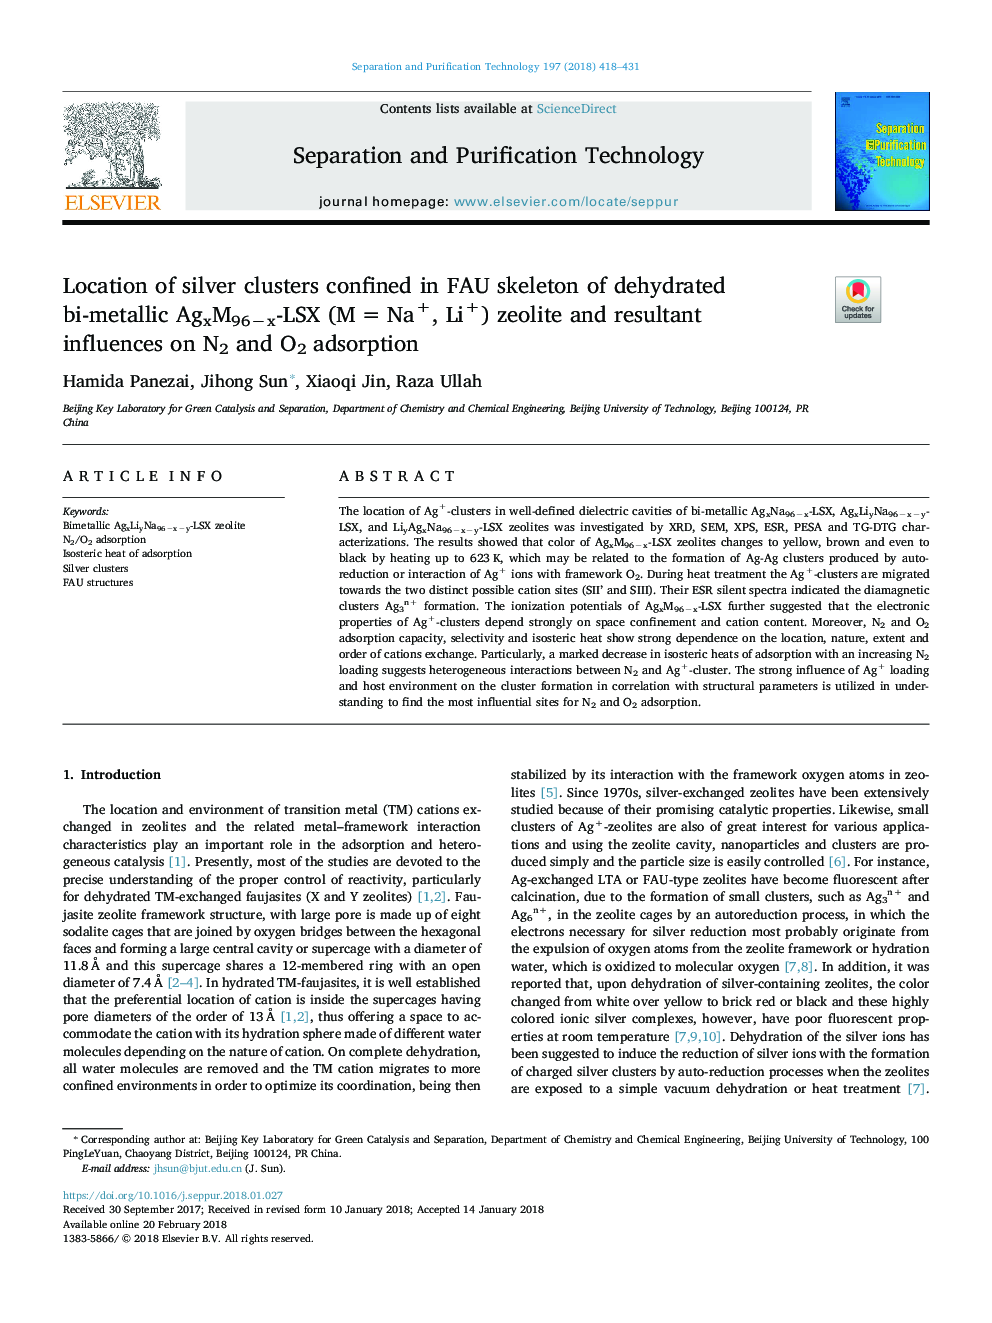 Location of silver clusters confined in FAU skeleton of dehydrated bi-metallic AgxM96âx-LSX (Mâ¯=â¯Na+, Li+) zeolite and resultant influences on N2 and O2 adsorption